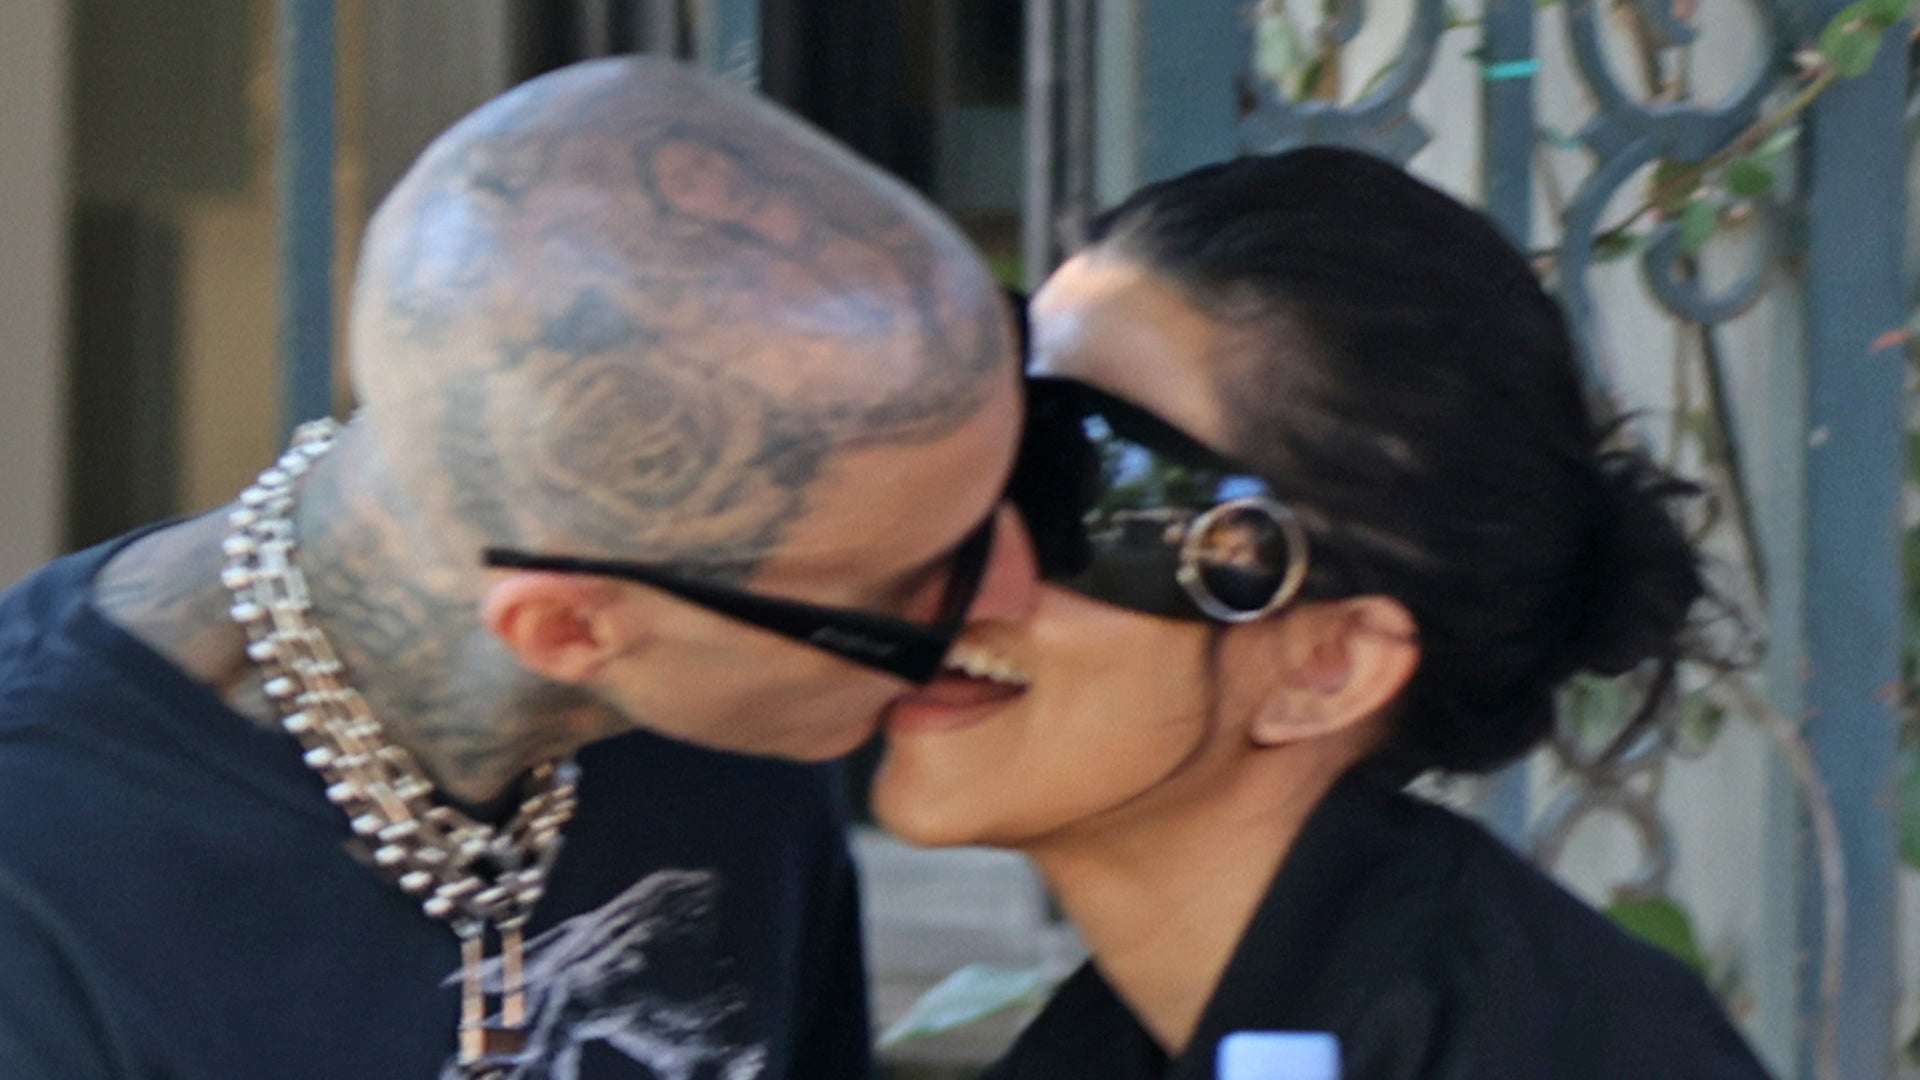 Kravis Returns to PDA With Tongue-Wagging Moment After Travis Barker's Hospitalization